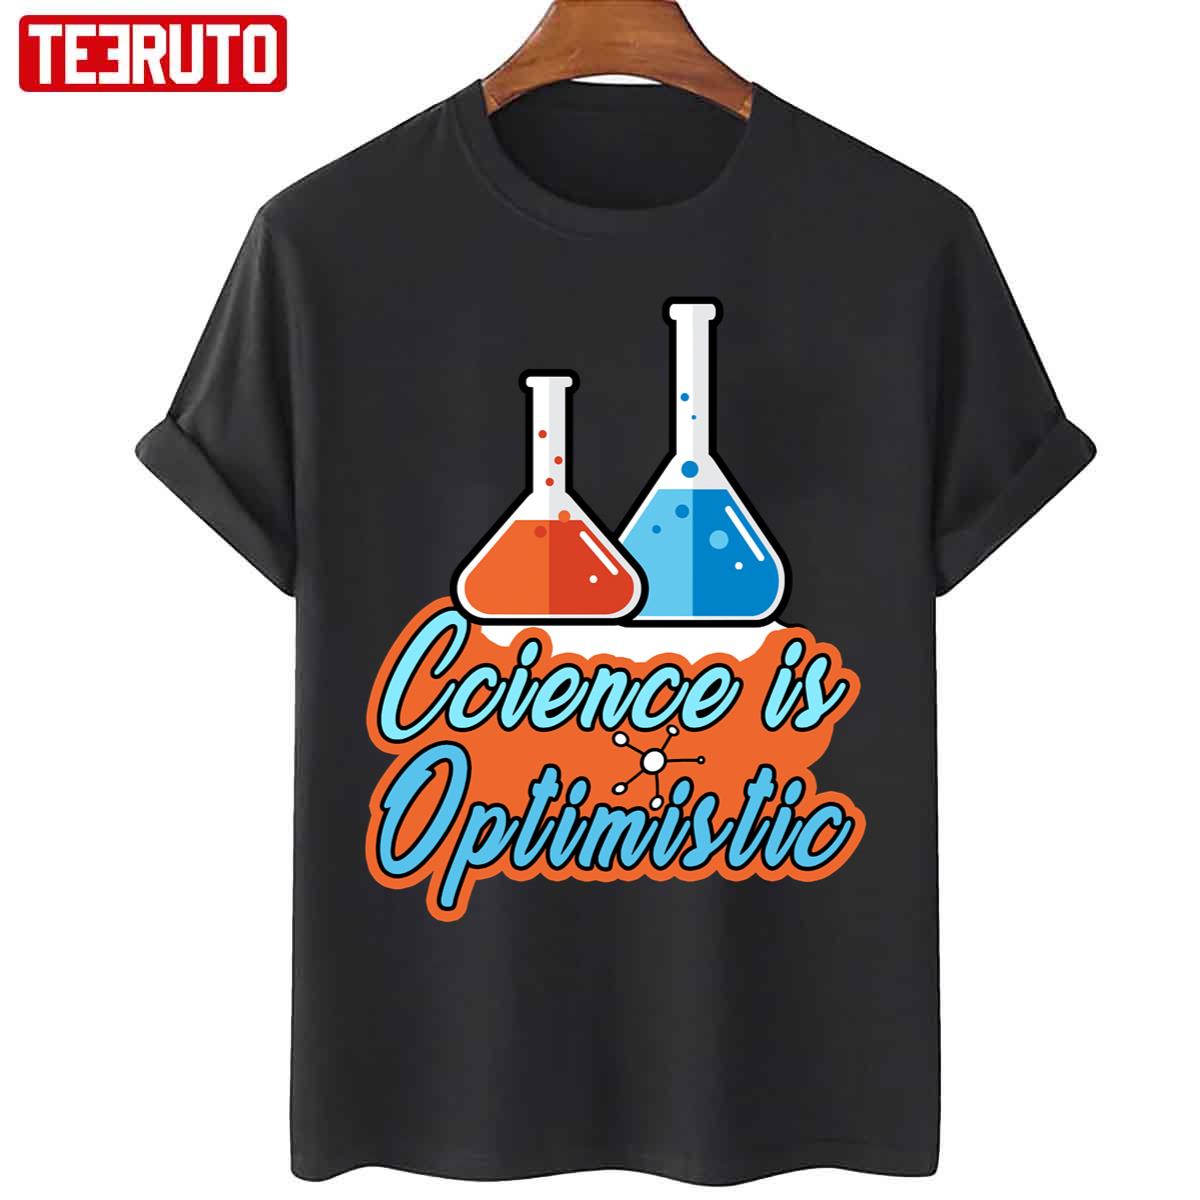 Science Is Optimistic Funny Scientific Sayings Unisex T-Shirt